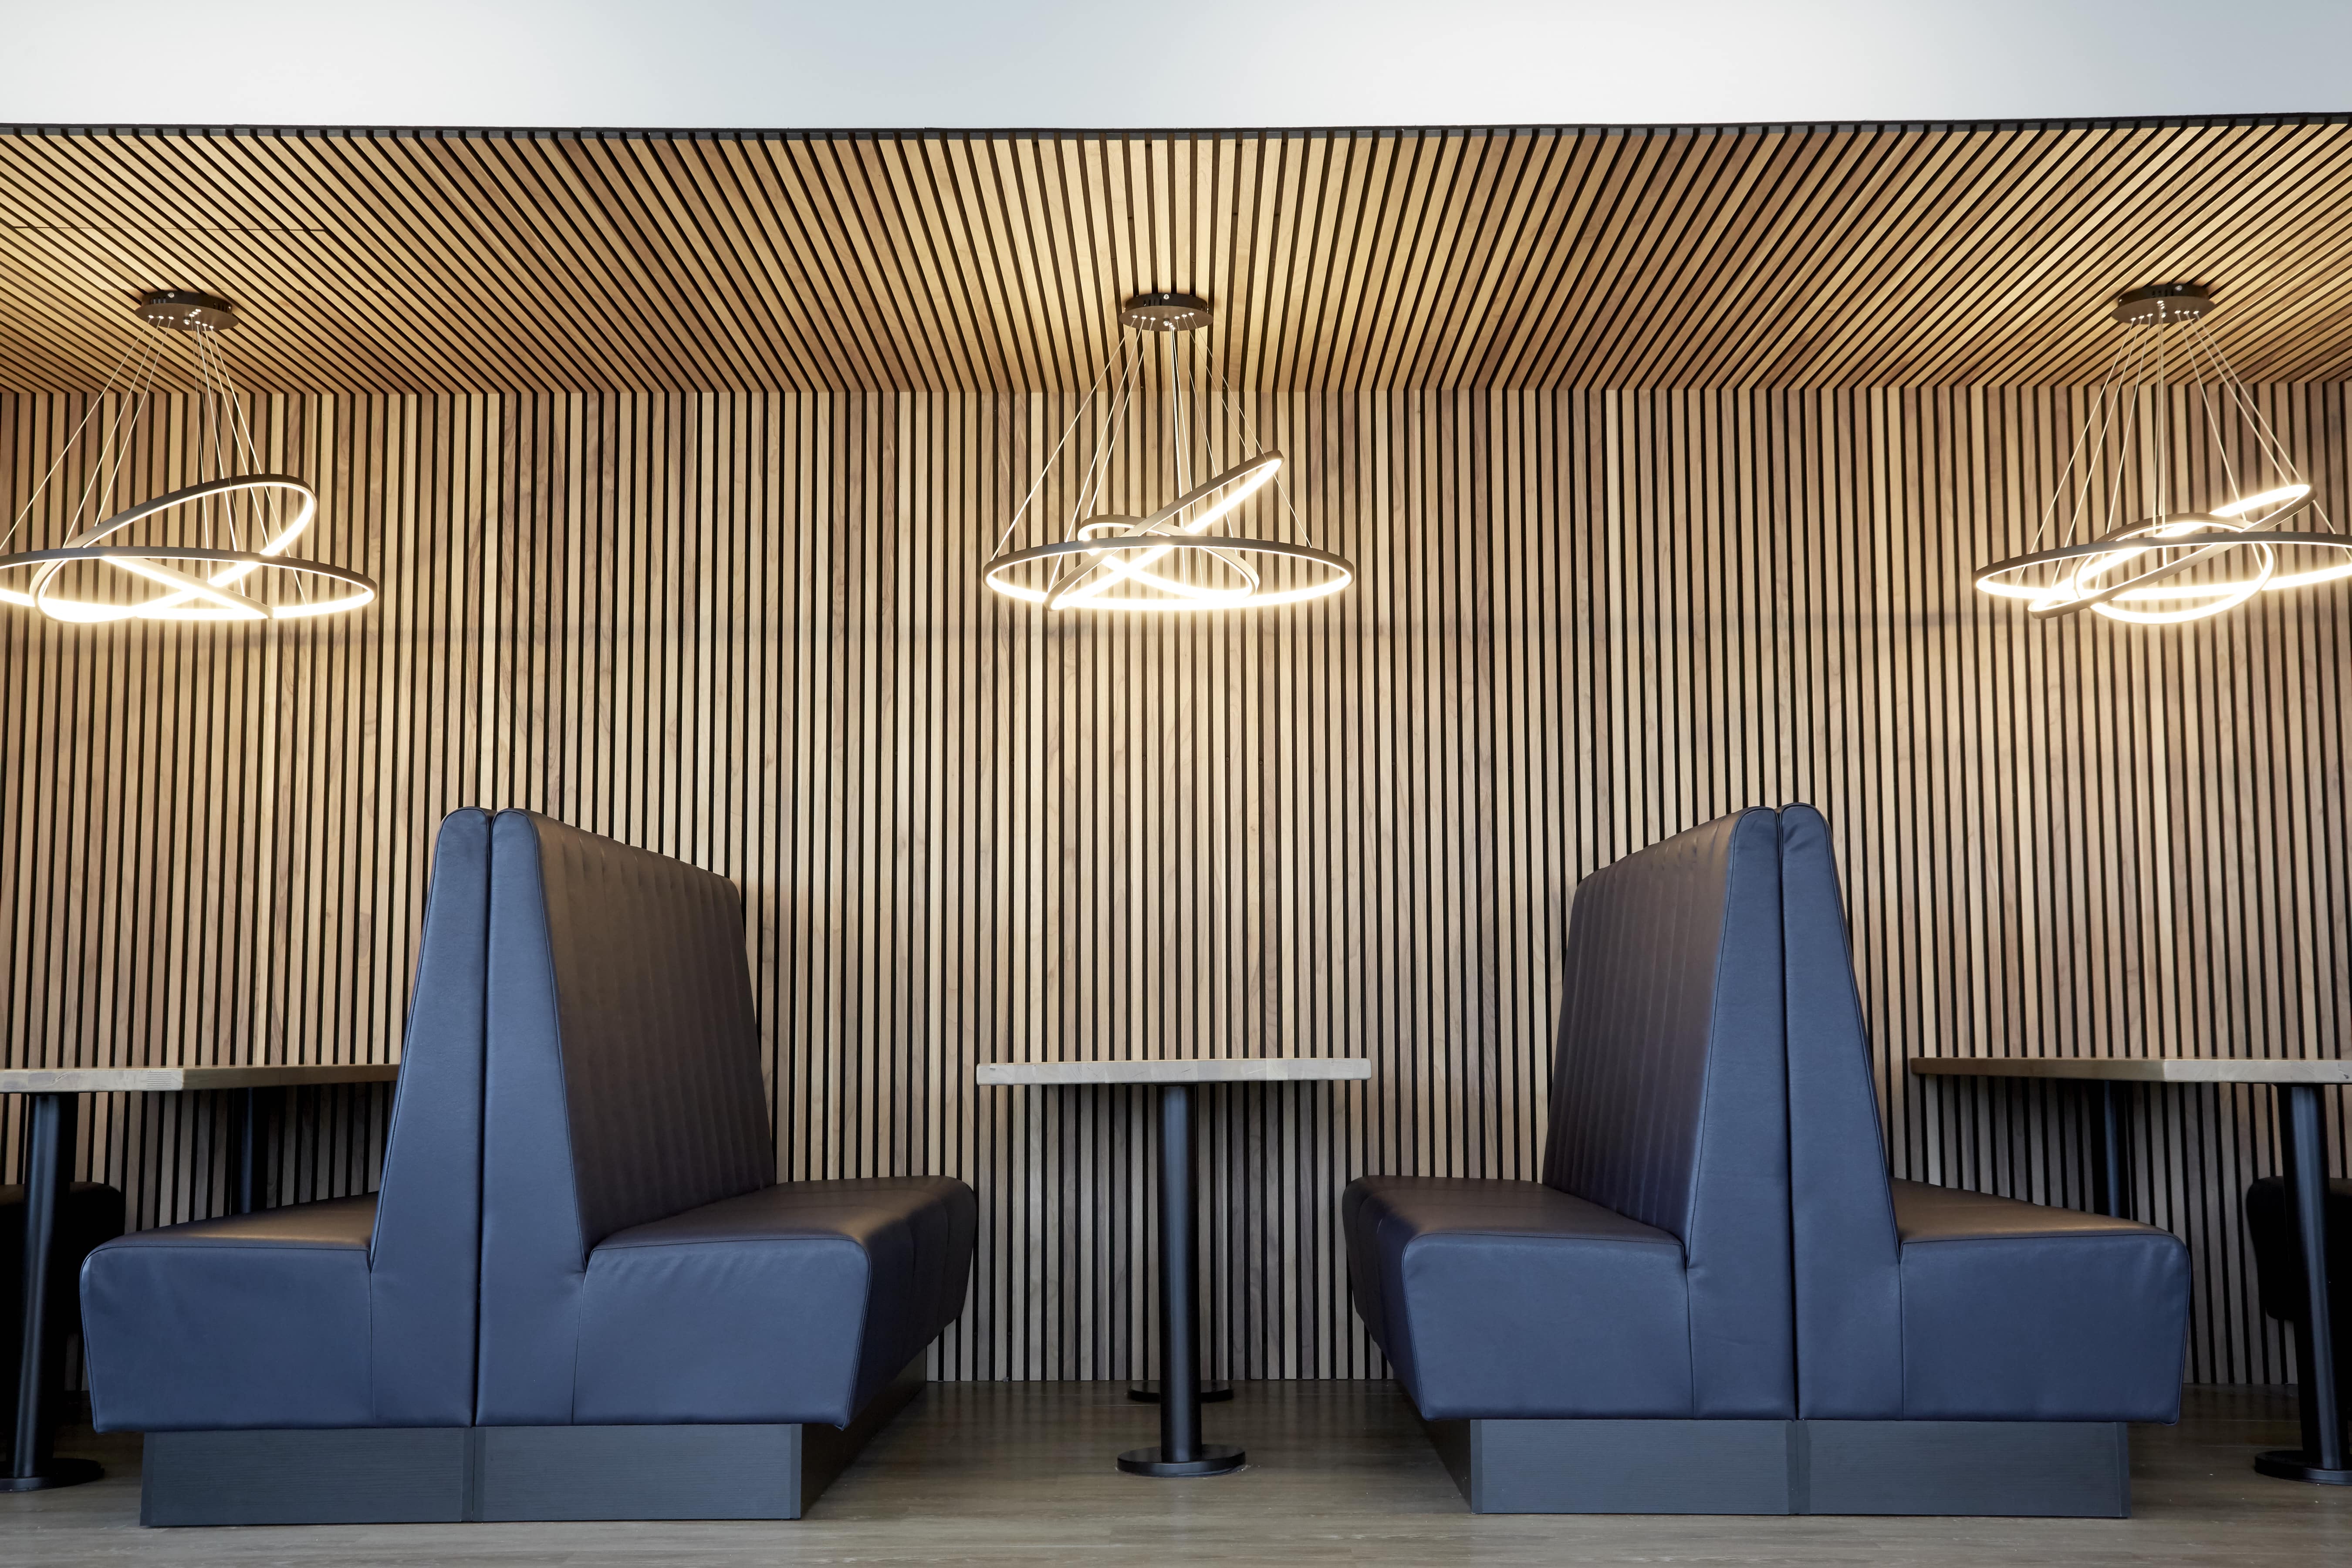 banner image of seating area with wooden panels